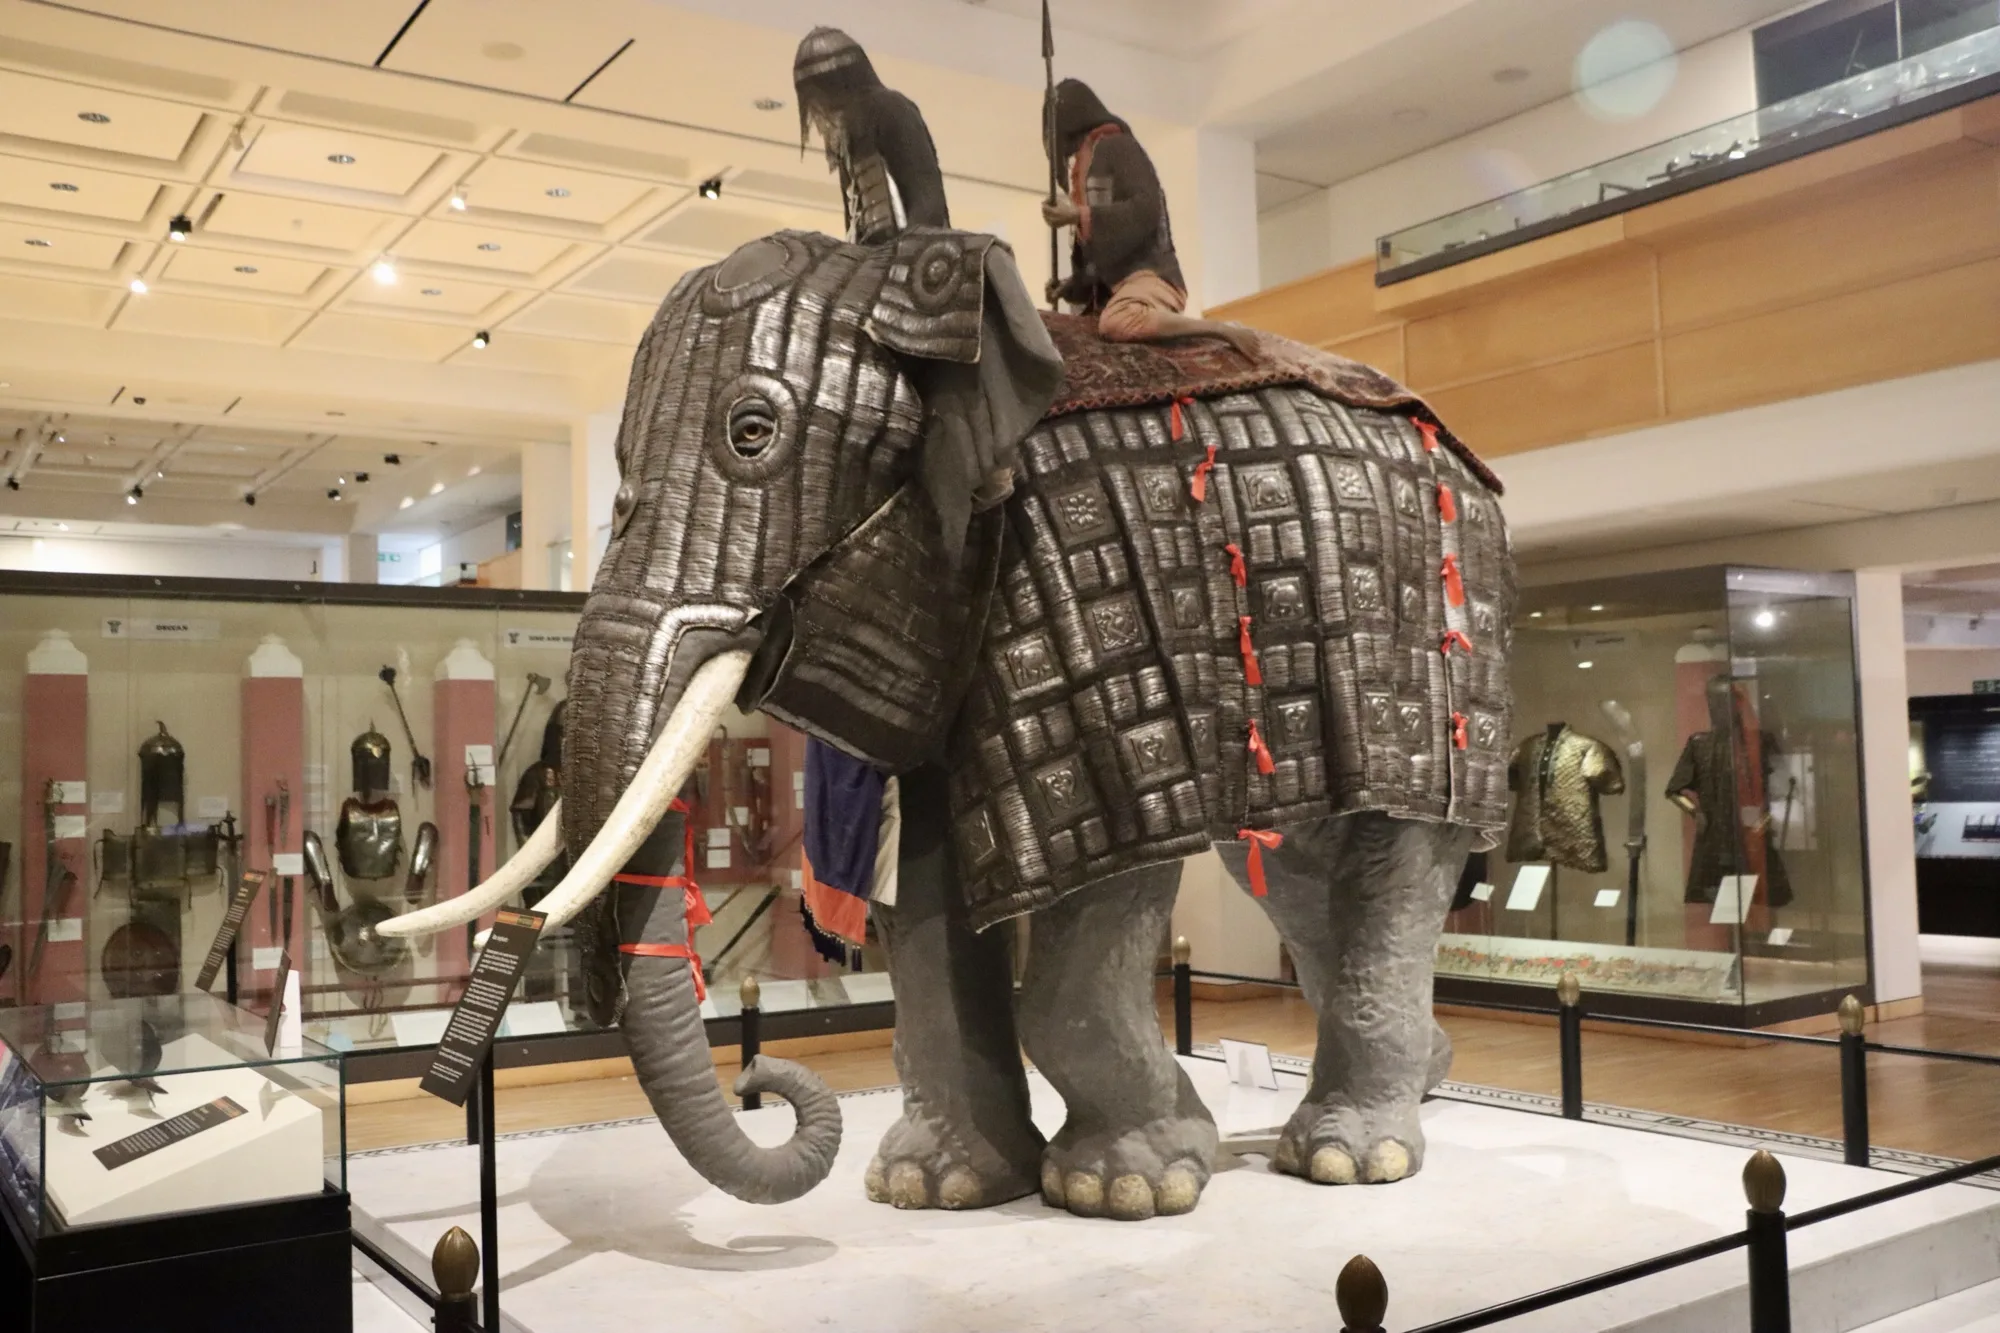 A model of an armoured elephant at the Royal Armouries museum in Leeds